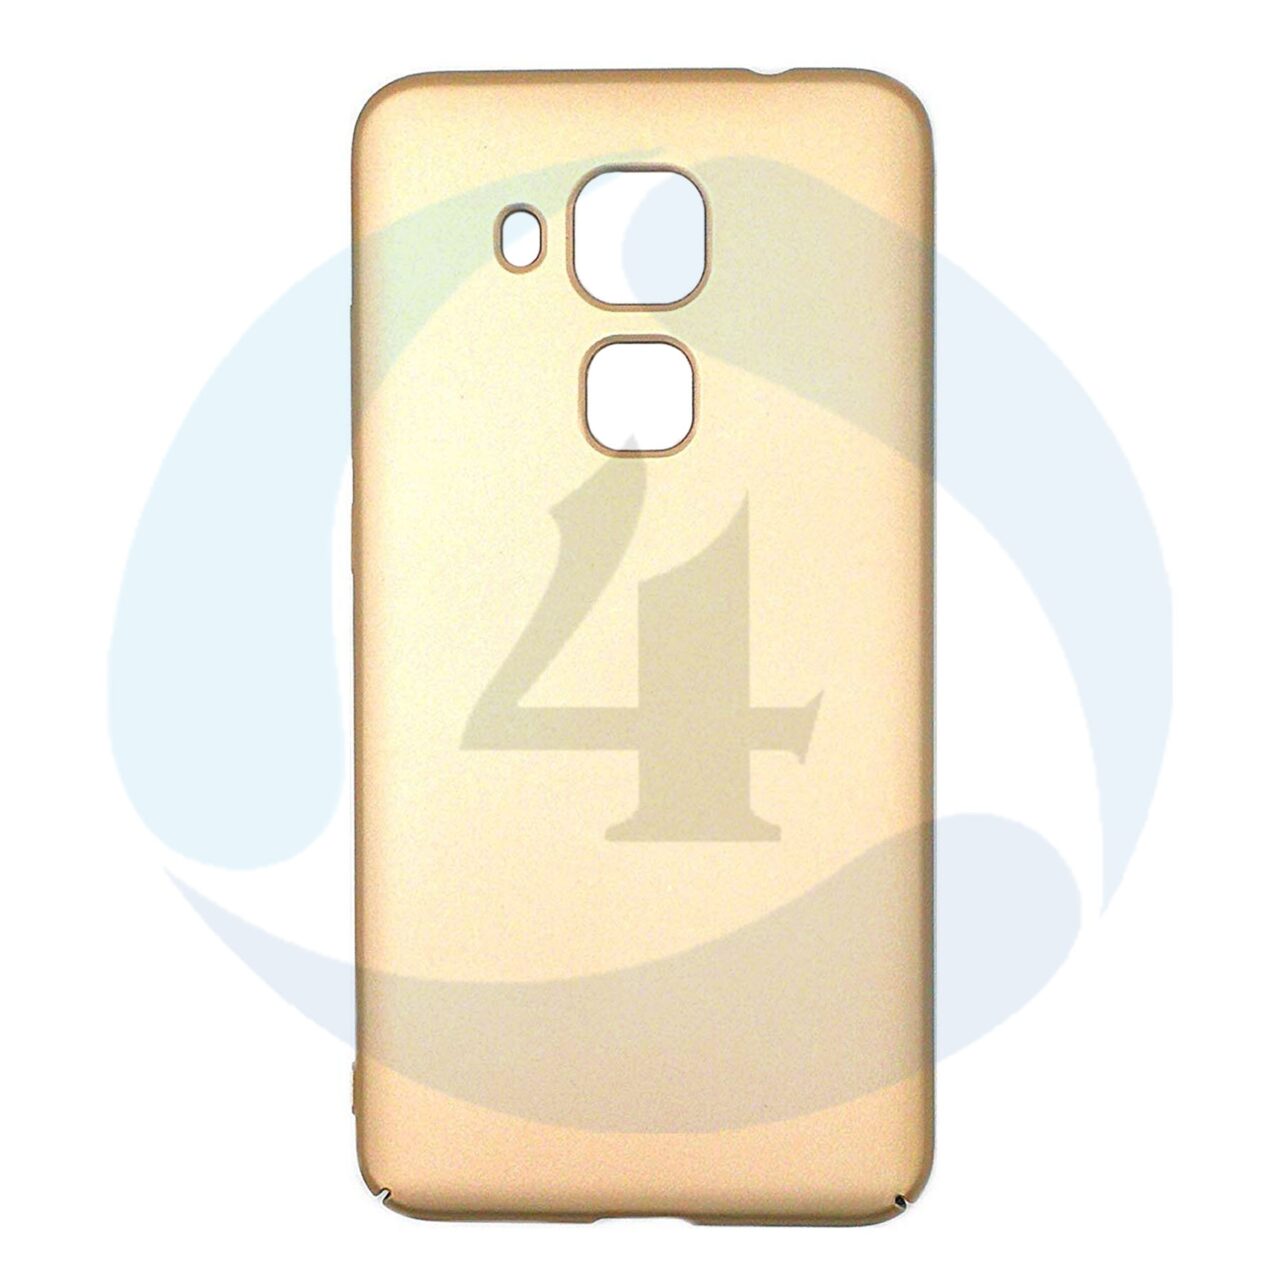 Backcover Gold For GT3 honor 5 C